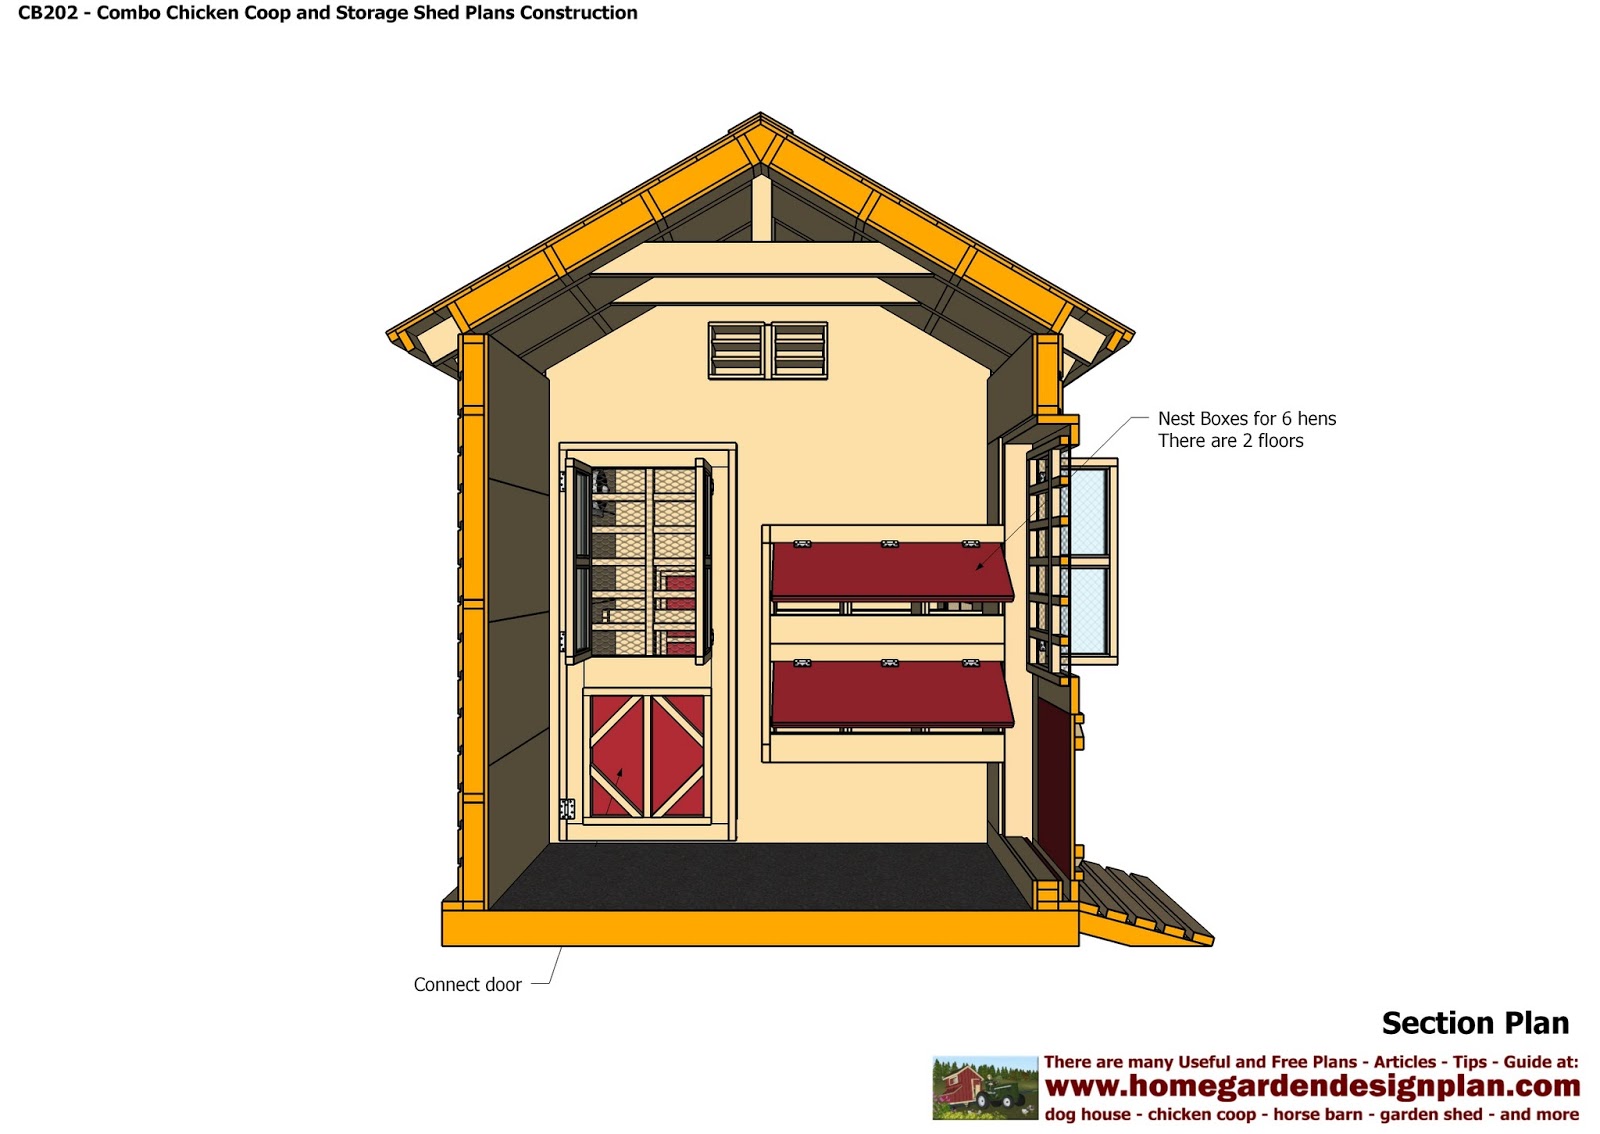 CB202 Combo Plans Chicken Coop Plans Construction Garden Sheds 